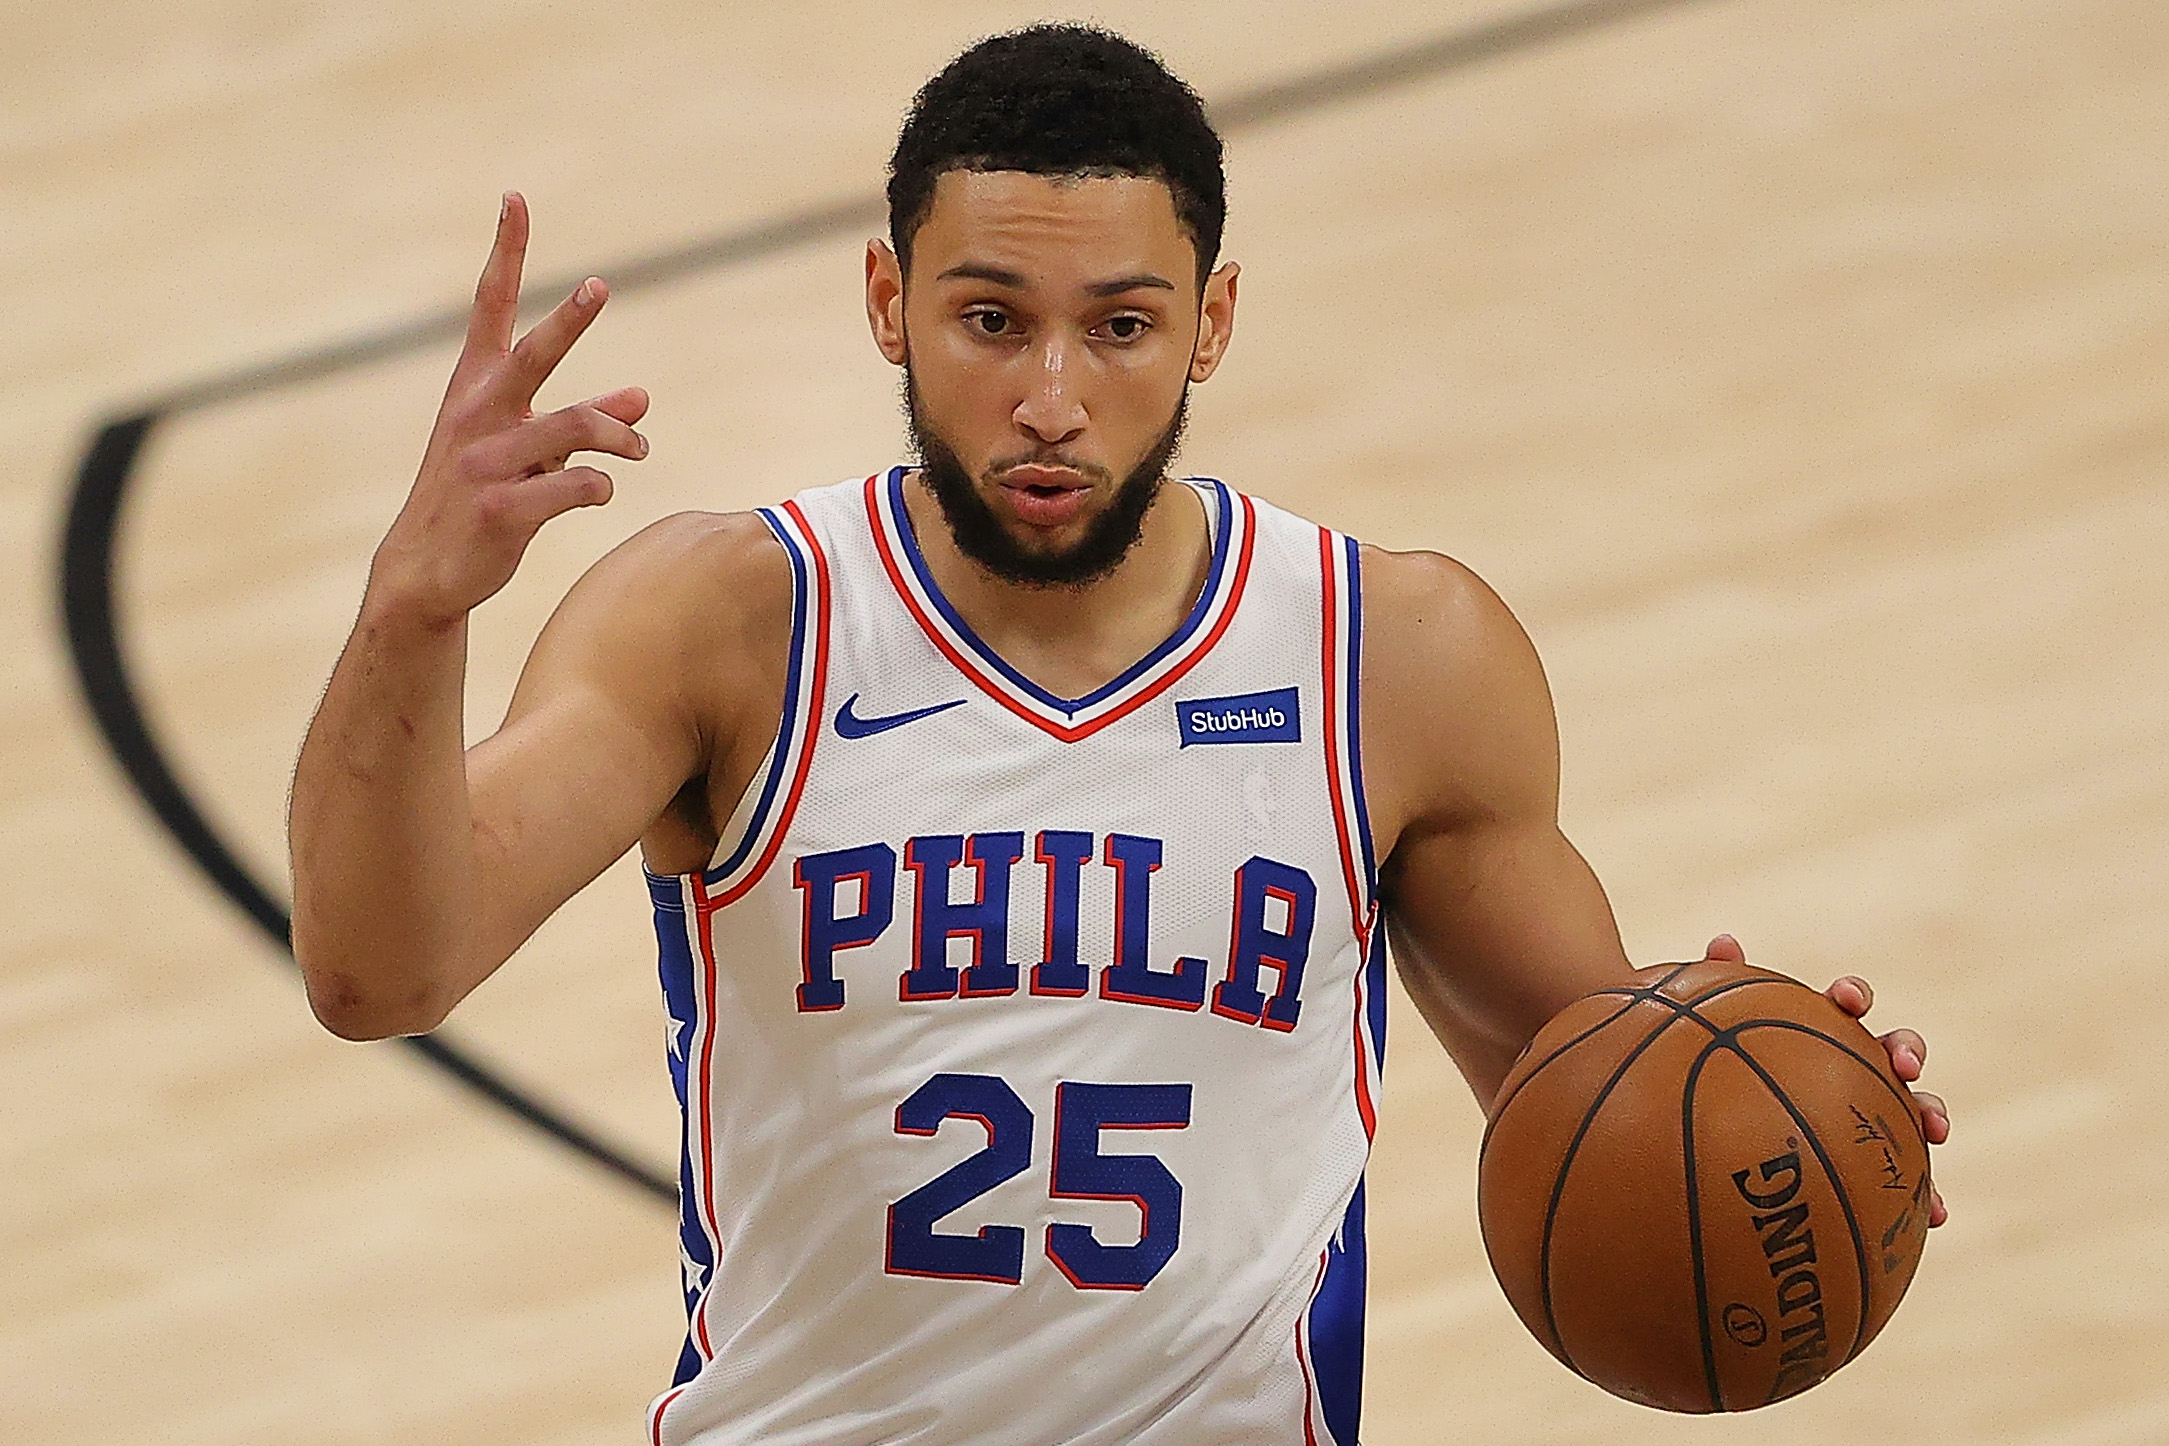 Ben Simmons #25 of the Philadelphia 76ers calls out a play against the Atlanta Hawks during the first half of game 6 of the Eastern Conference Semifinals.